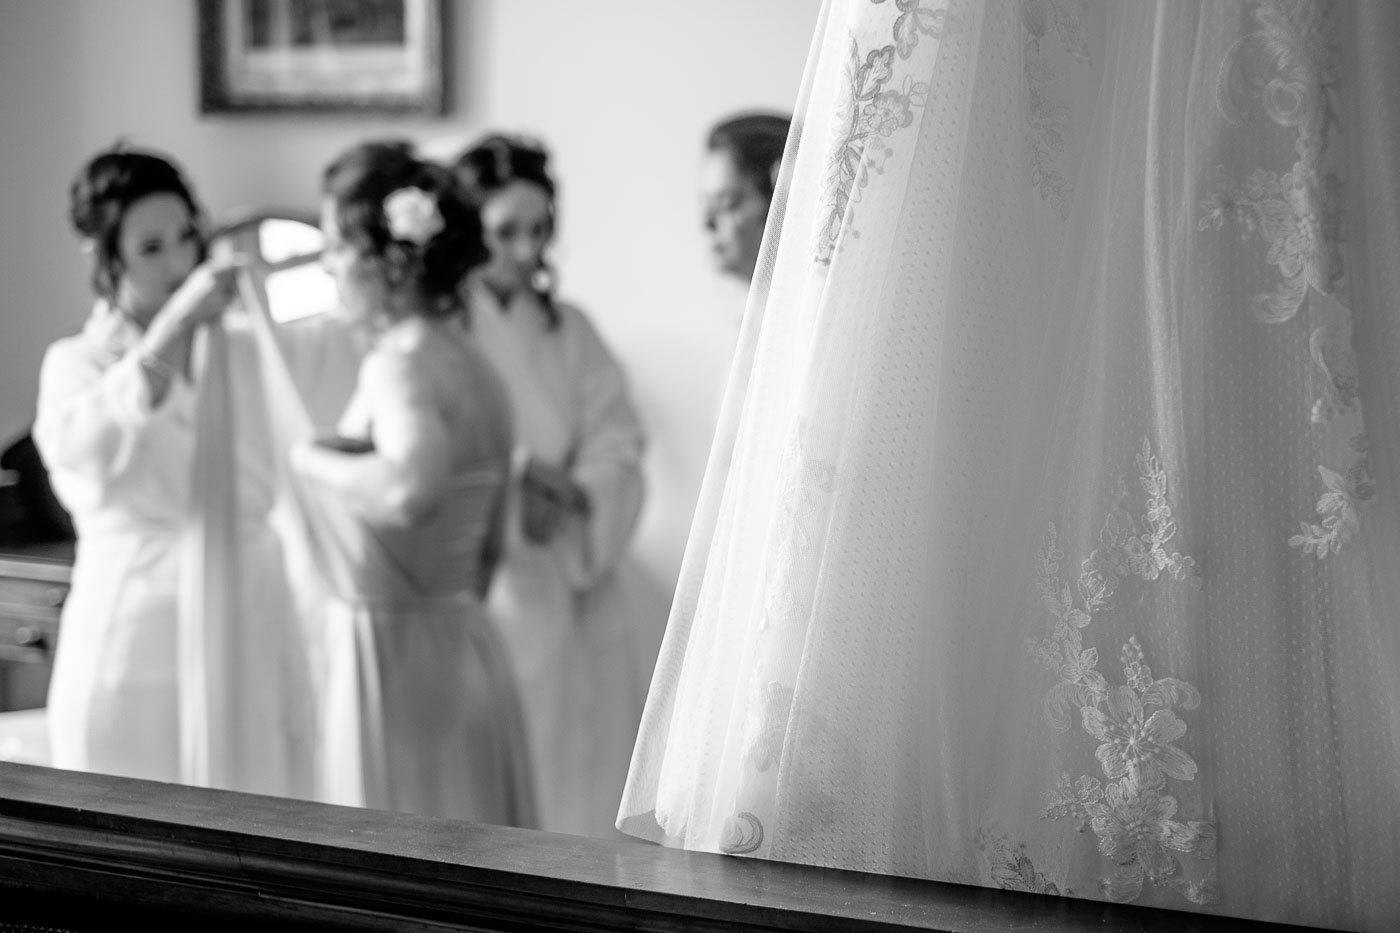 The bridesmaids getting ready